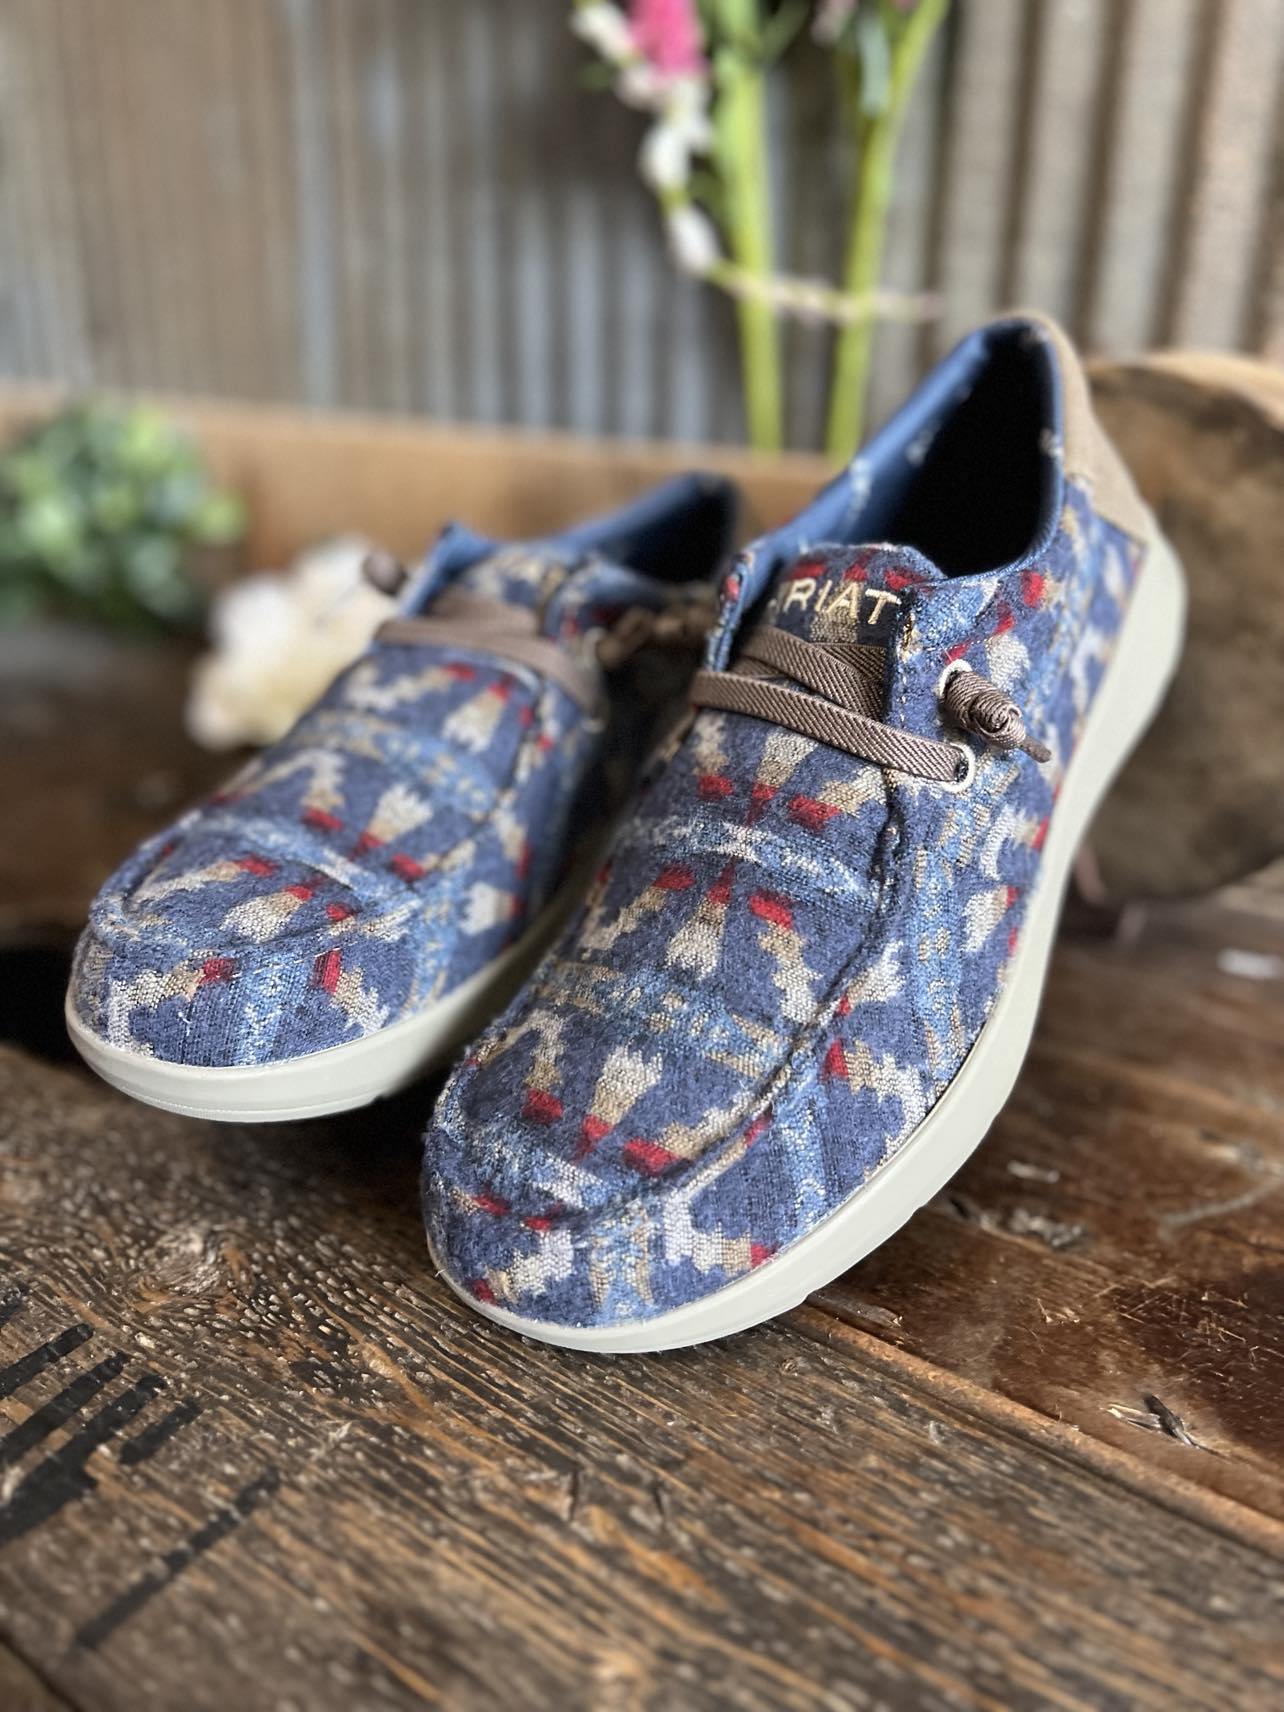 Men's Ariat Hilo Stretch Lace Sneakers in Wooly Blue Aztec-Men's Casual Shoes-Ariat-Lucky J Boots & More, Women's, Men's, & Kids Western Store Located in Carthage, MO